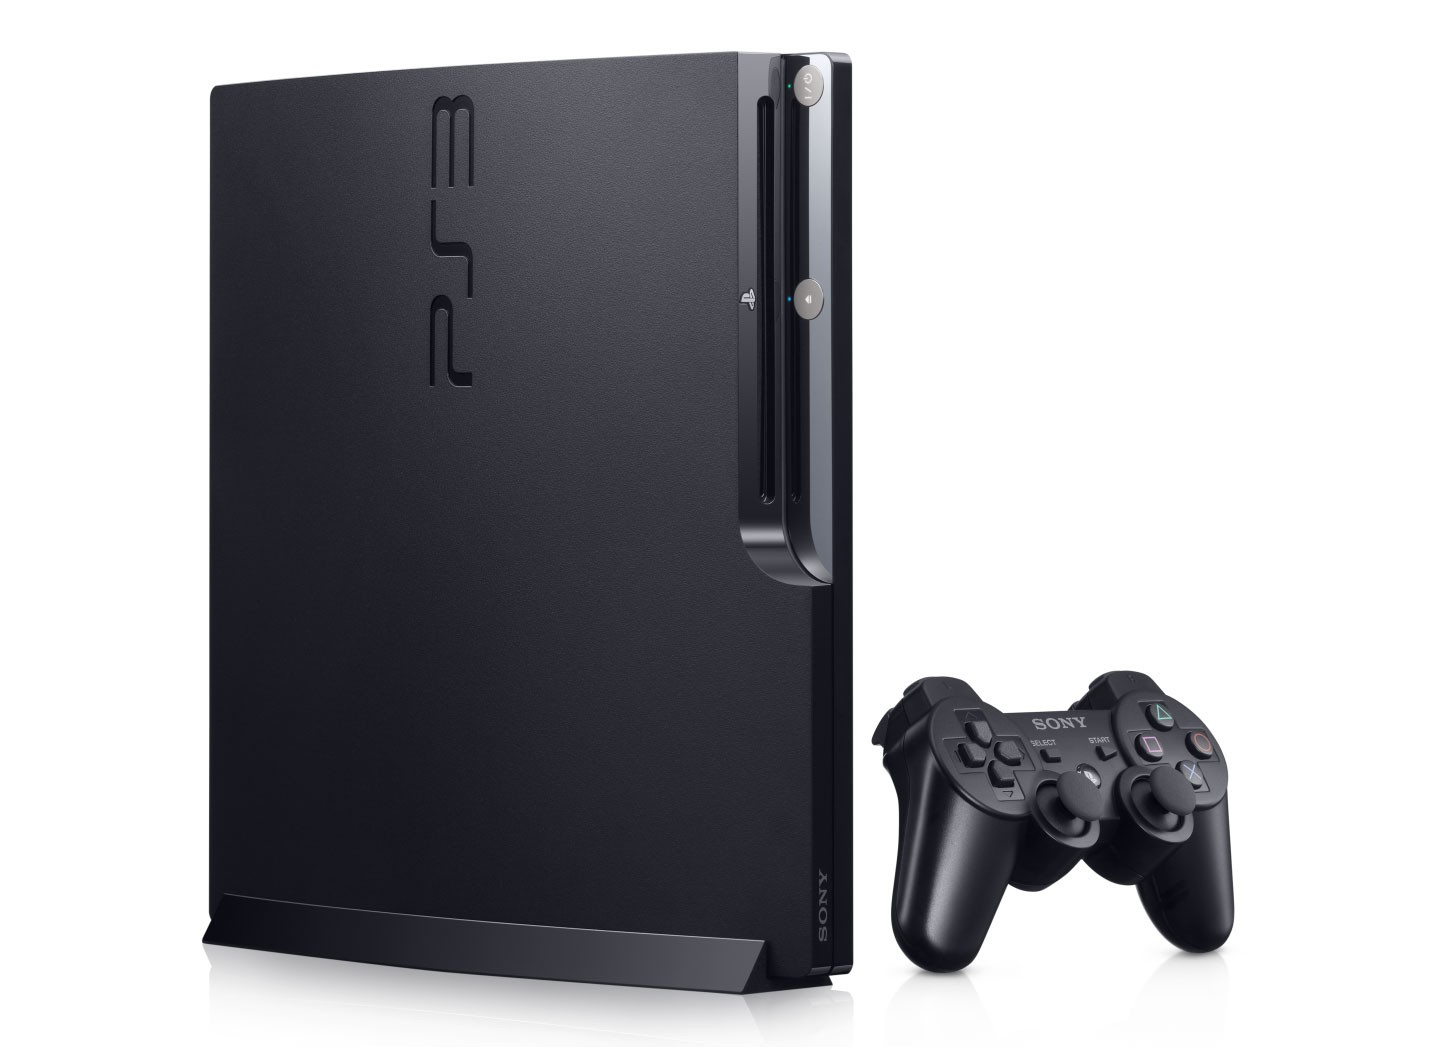 Playstation 3 Deals | Reviews and Deals on new Playstation ...
